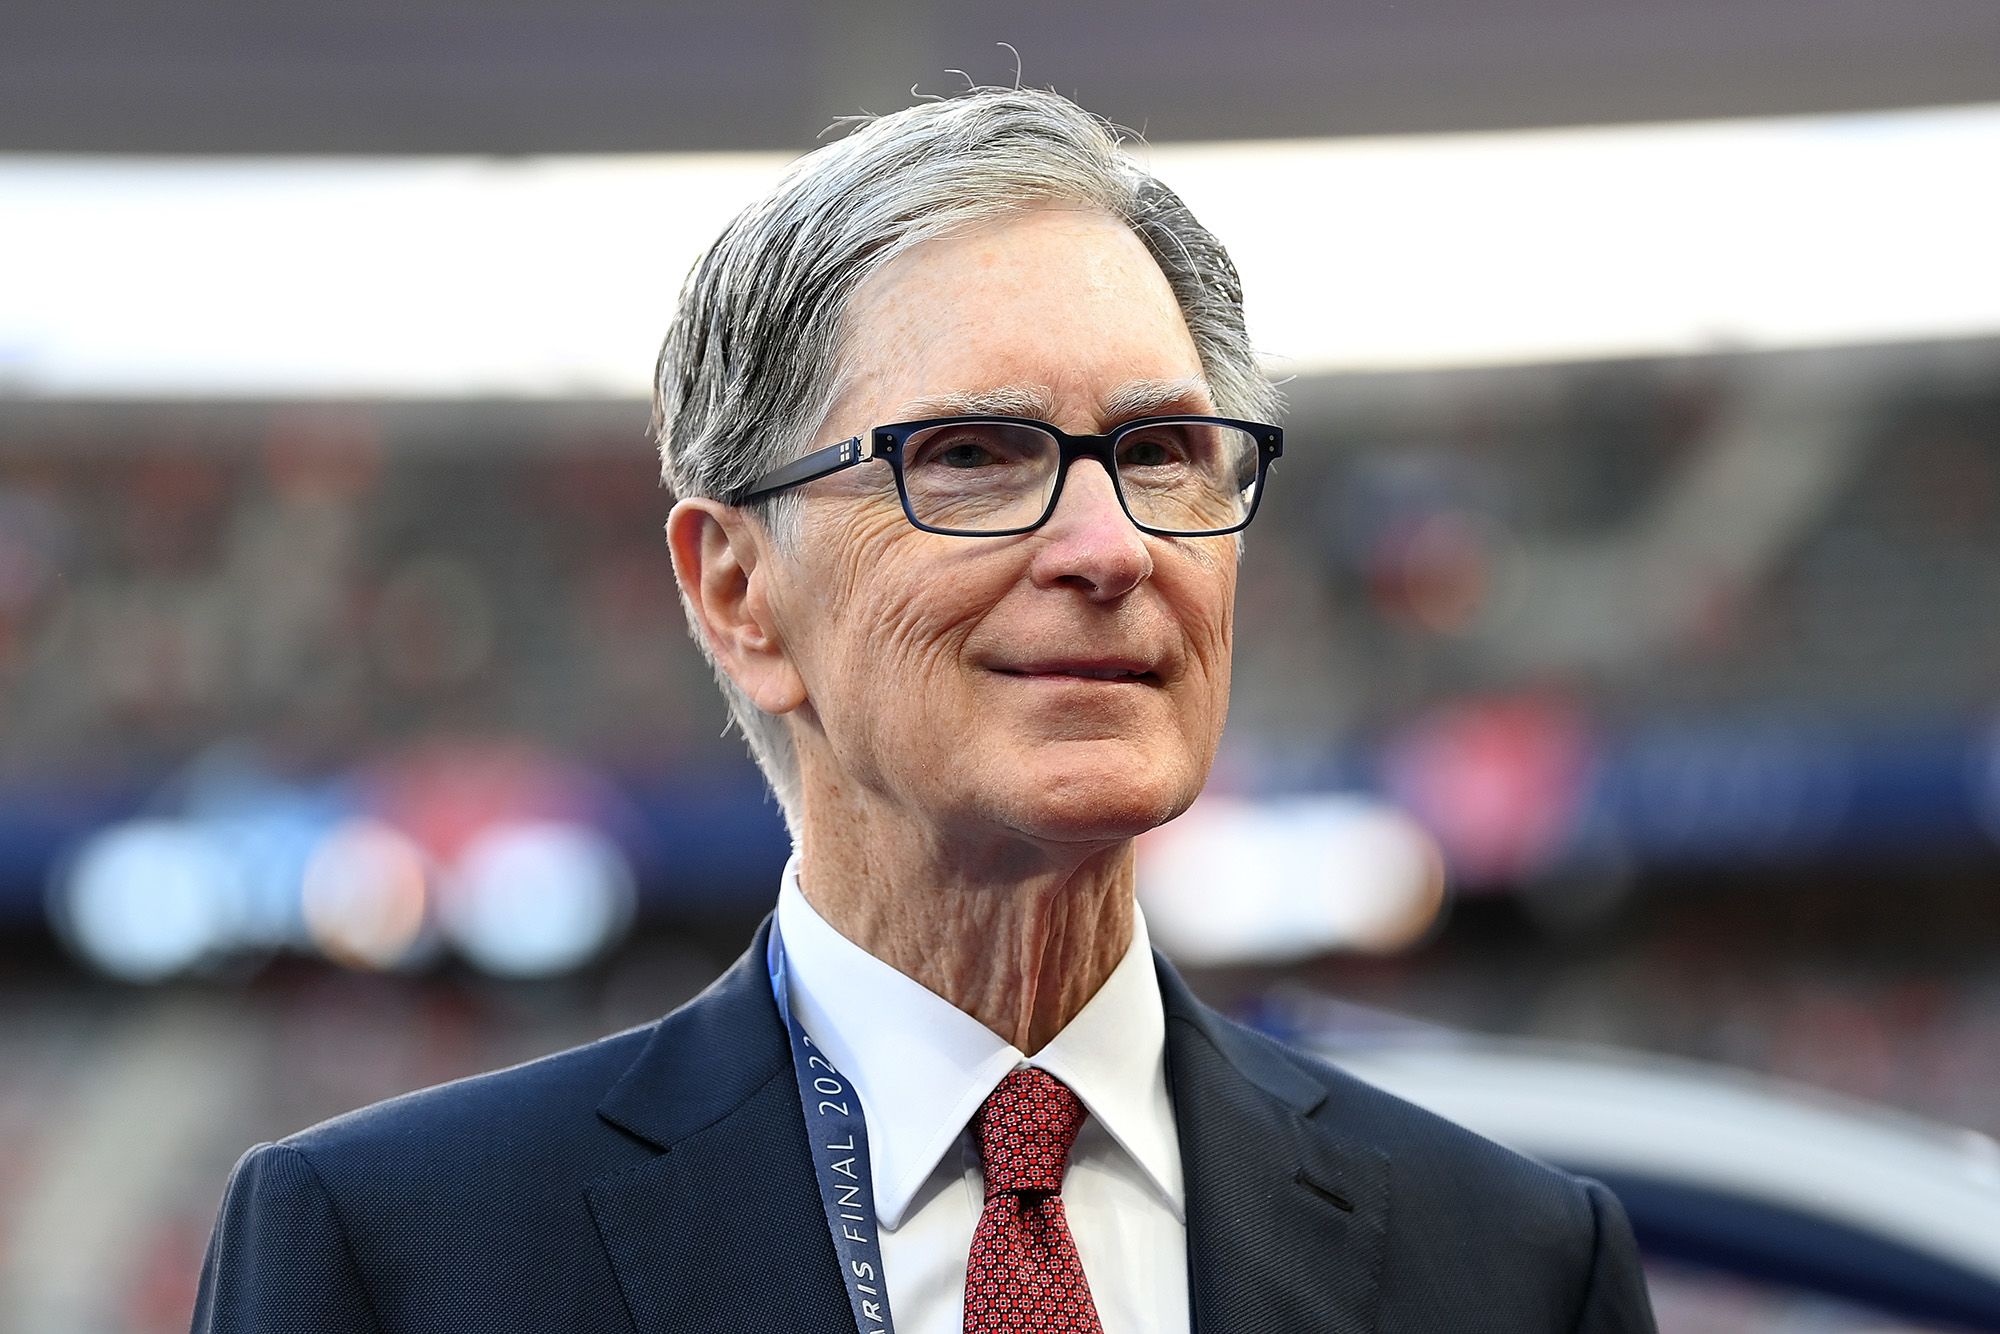 Liverpool soccer club is not for sale, owner John Henry tells Boston Sports  Journal